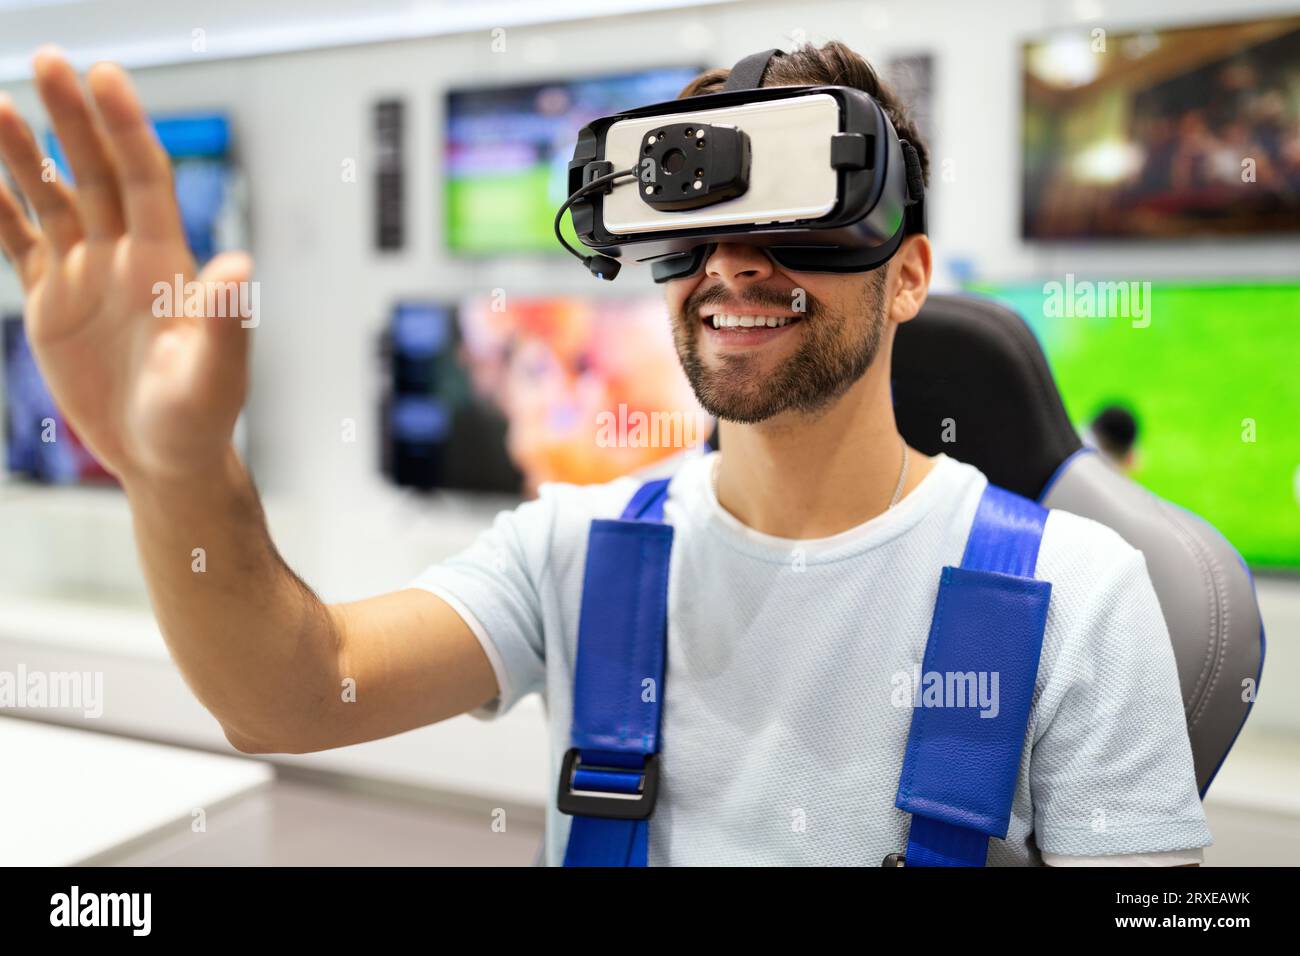 Portrait of man using virtual reality headset at exhibition show. VR technology simulation concept Stock Photo